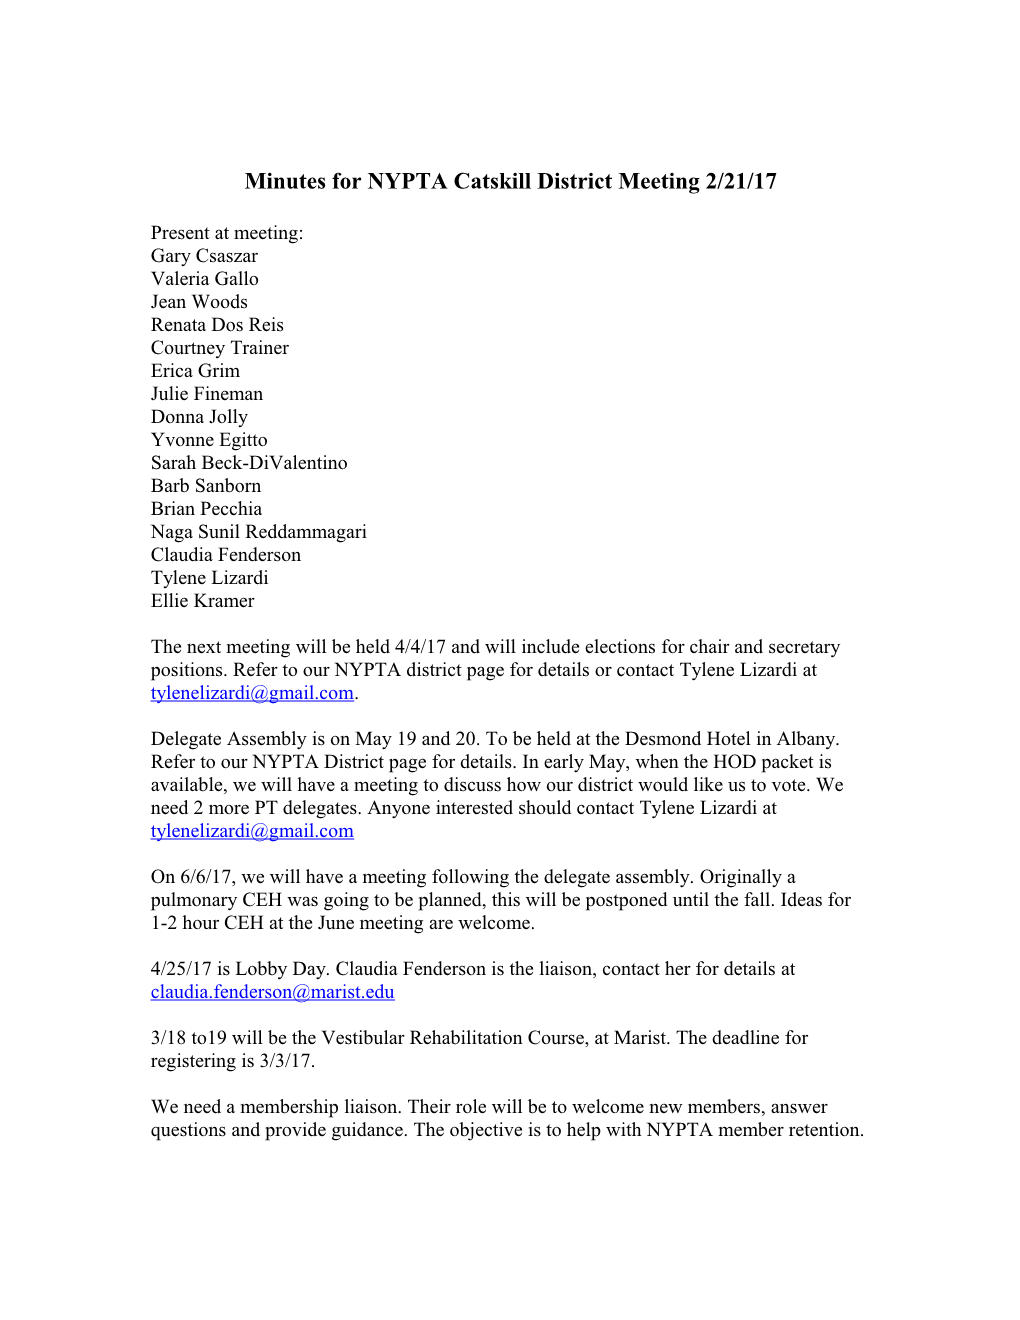 Minutes for NYPTA Catskill District Meeting 2/21/17